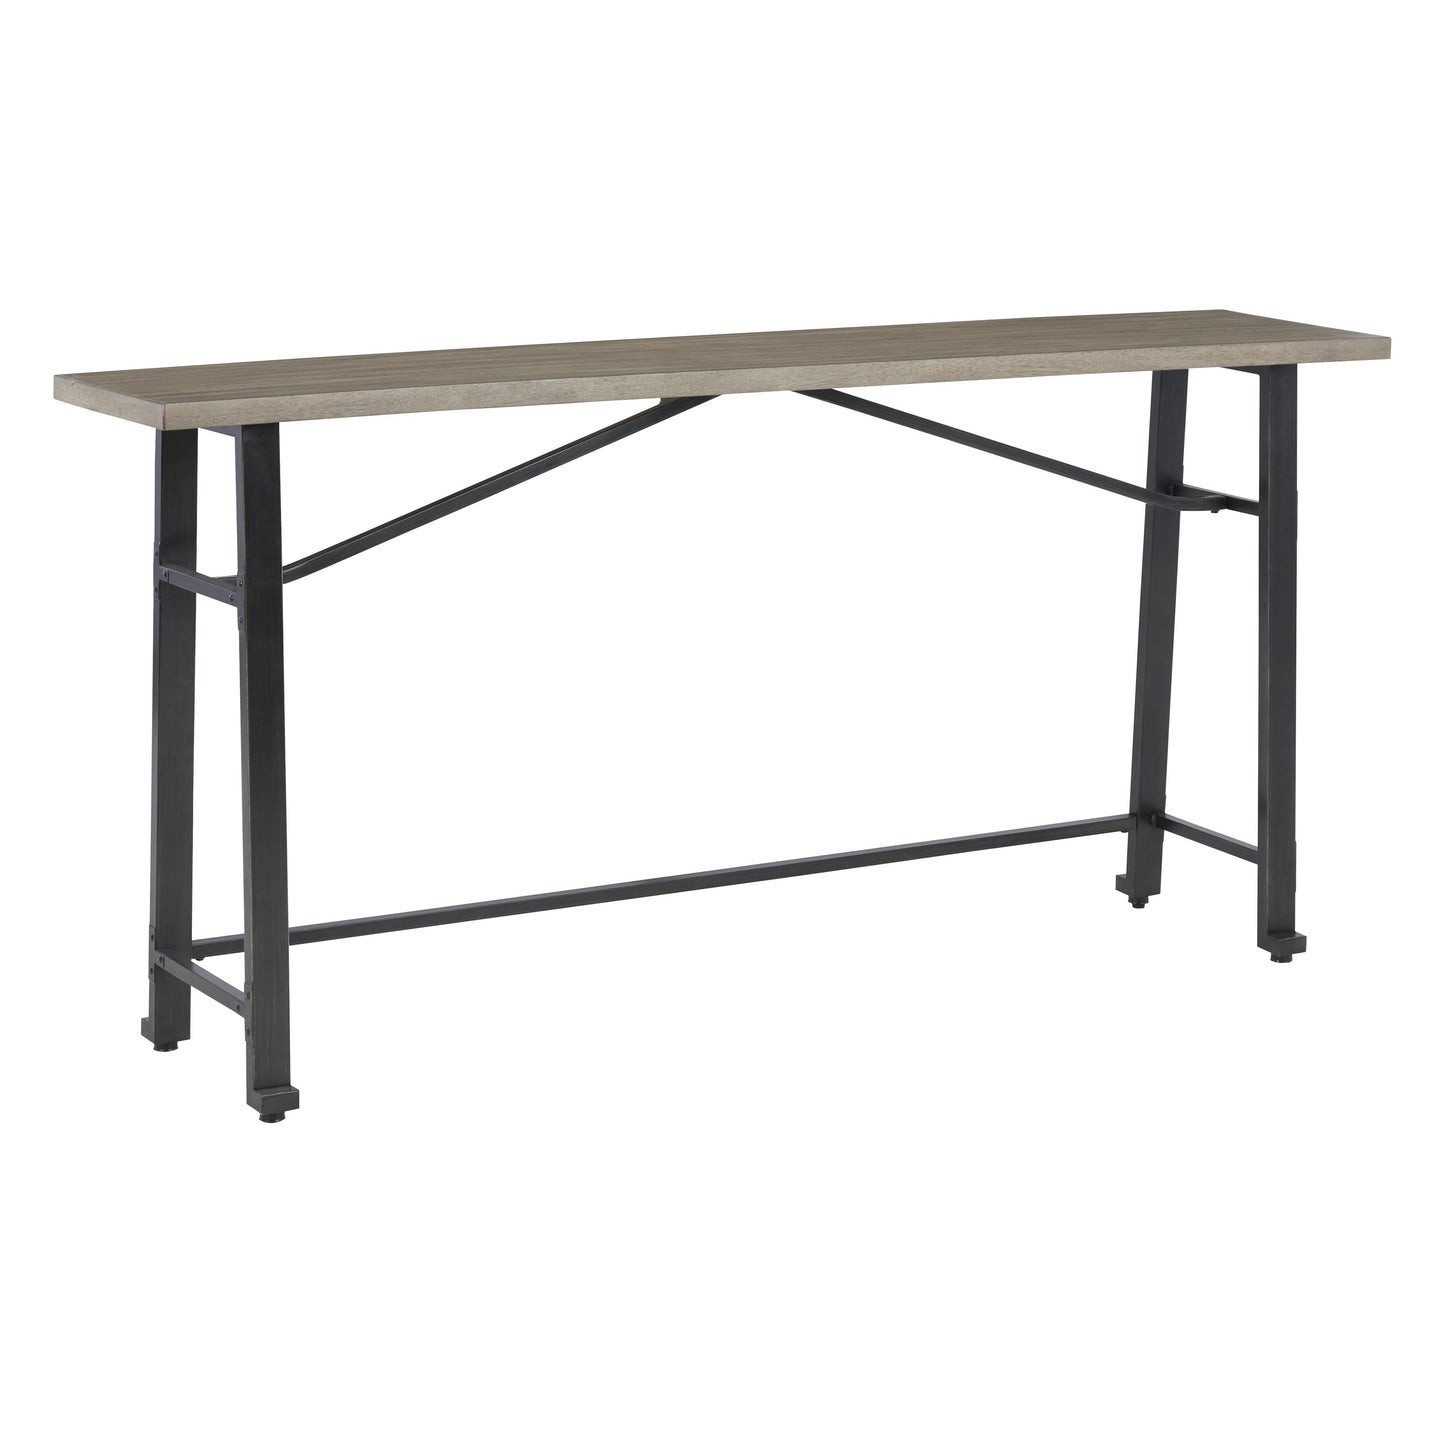 Signature Design by Ashley Lesterton Counter Height Dining Table with Trestle Base D334-52 IMAGE 1